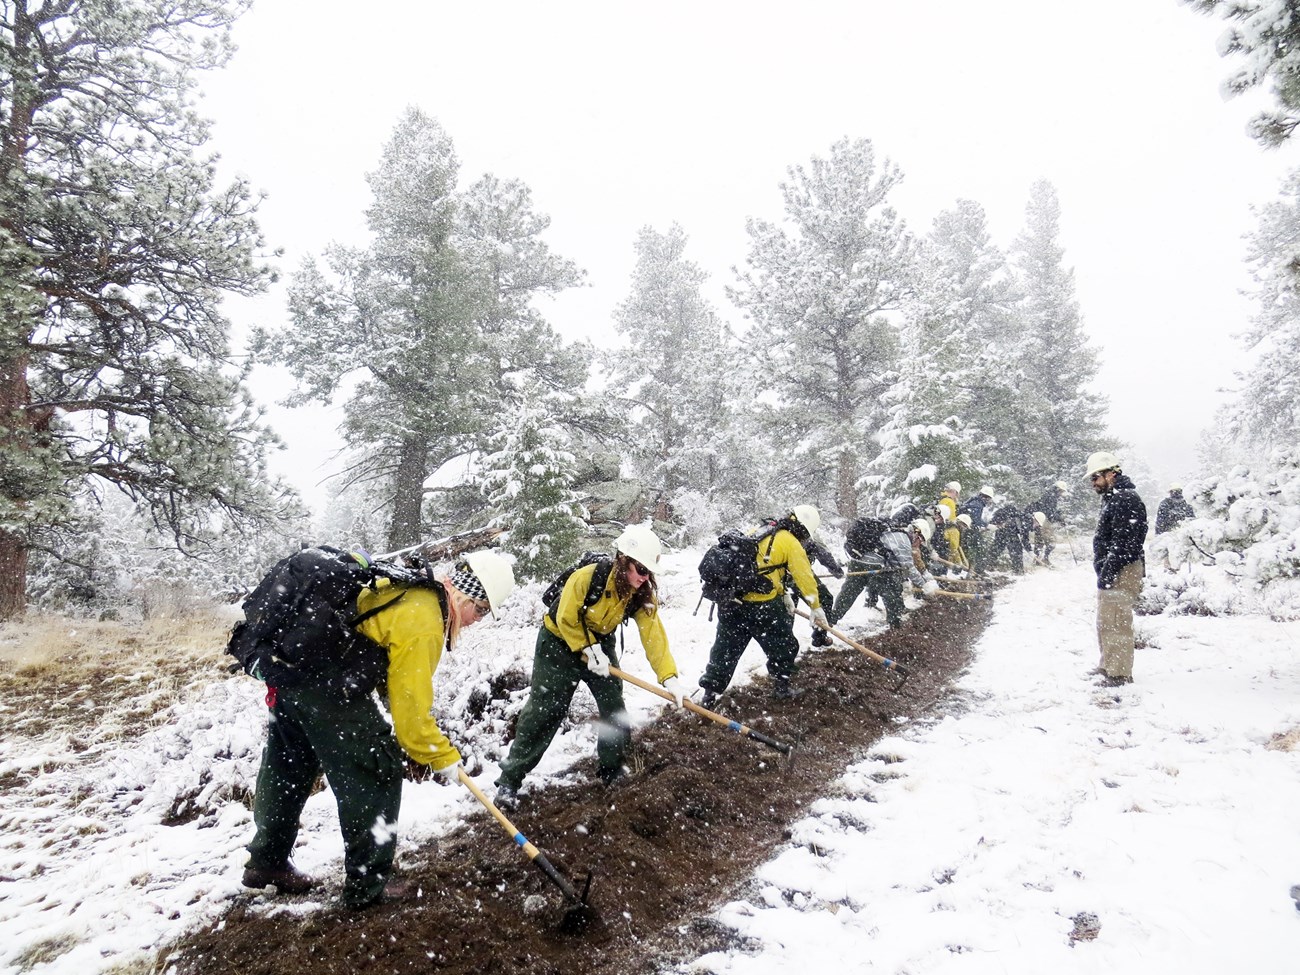 firefighters uses hand tools to dig fireline in the snow while a supervisor looks on